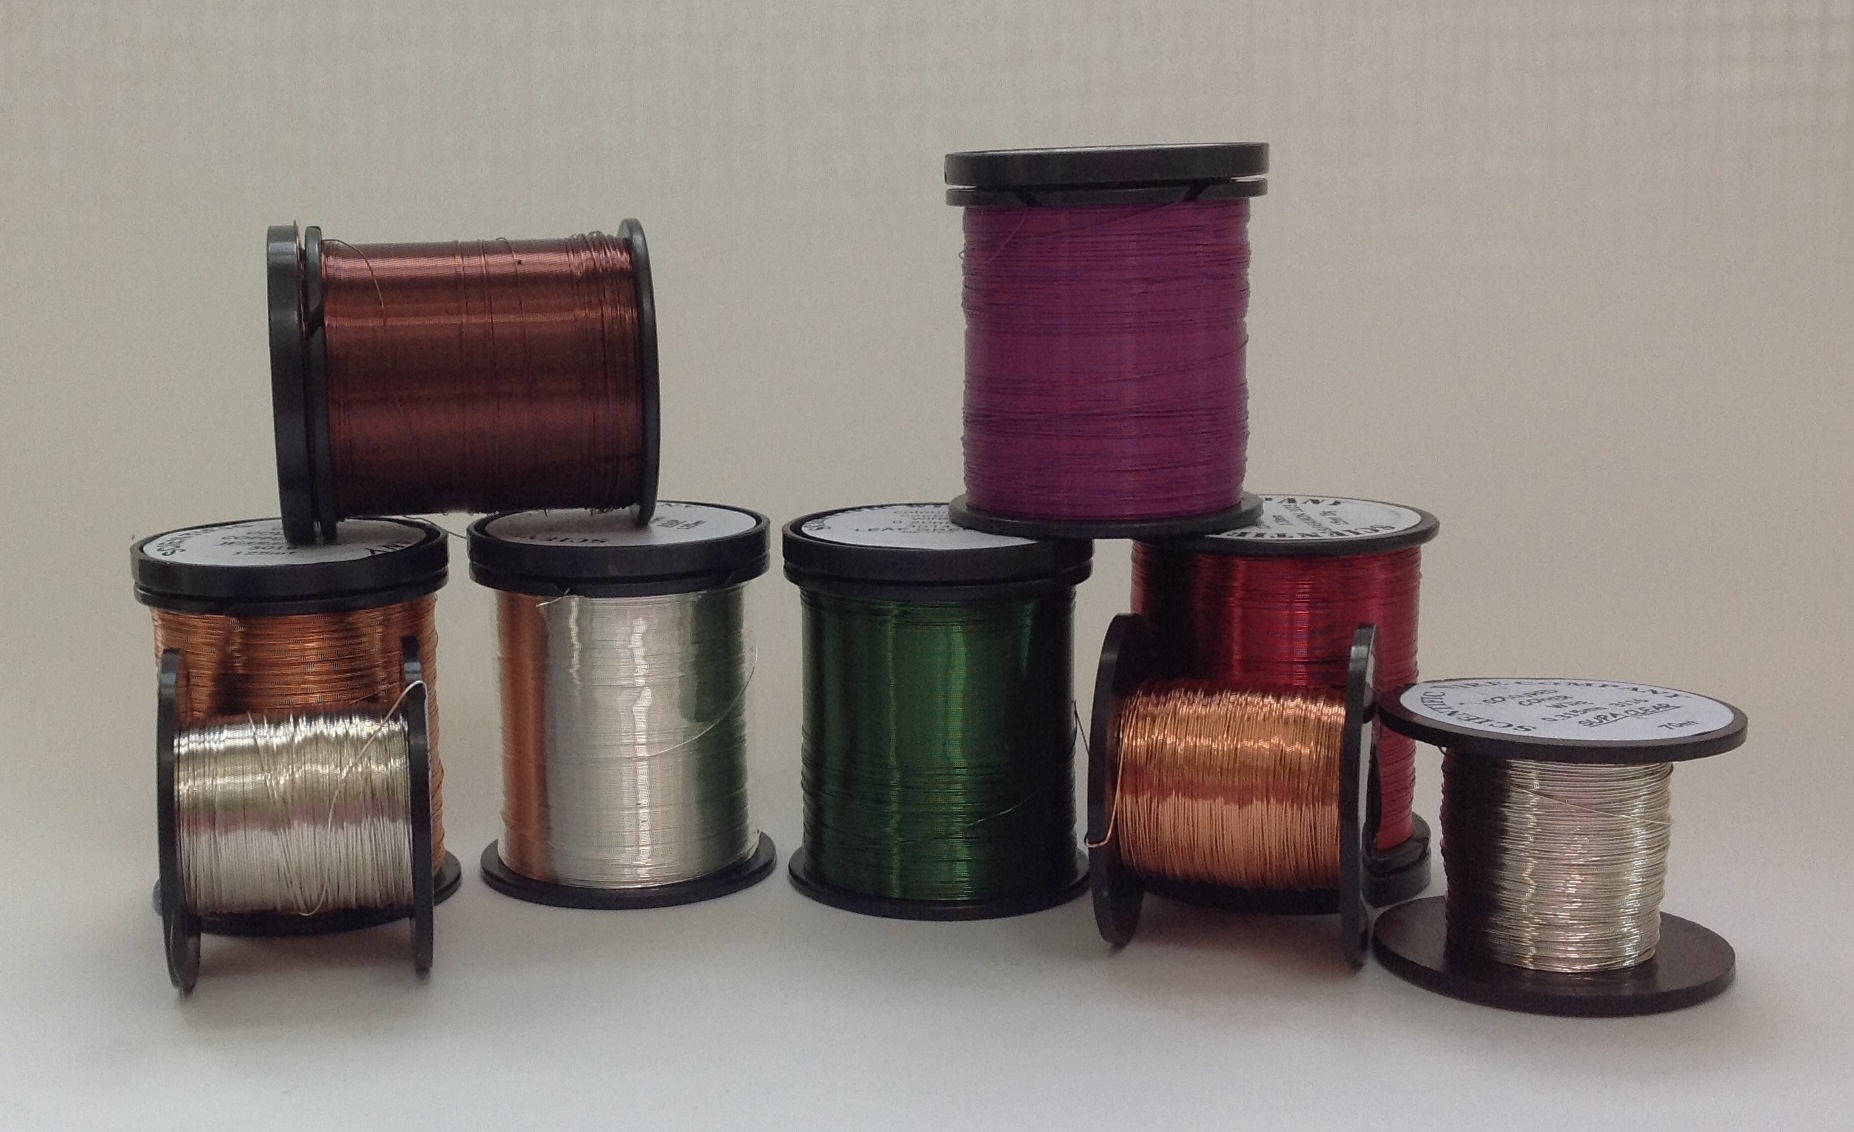 Reels of wire came in the post today